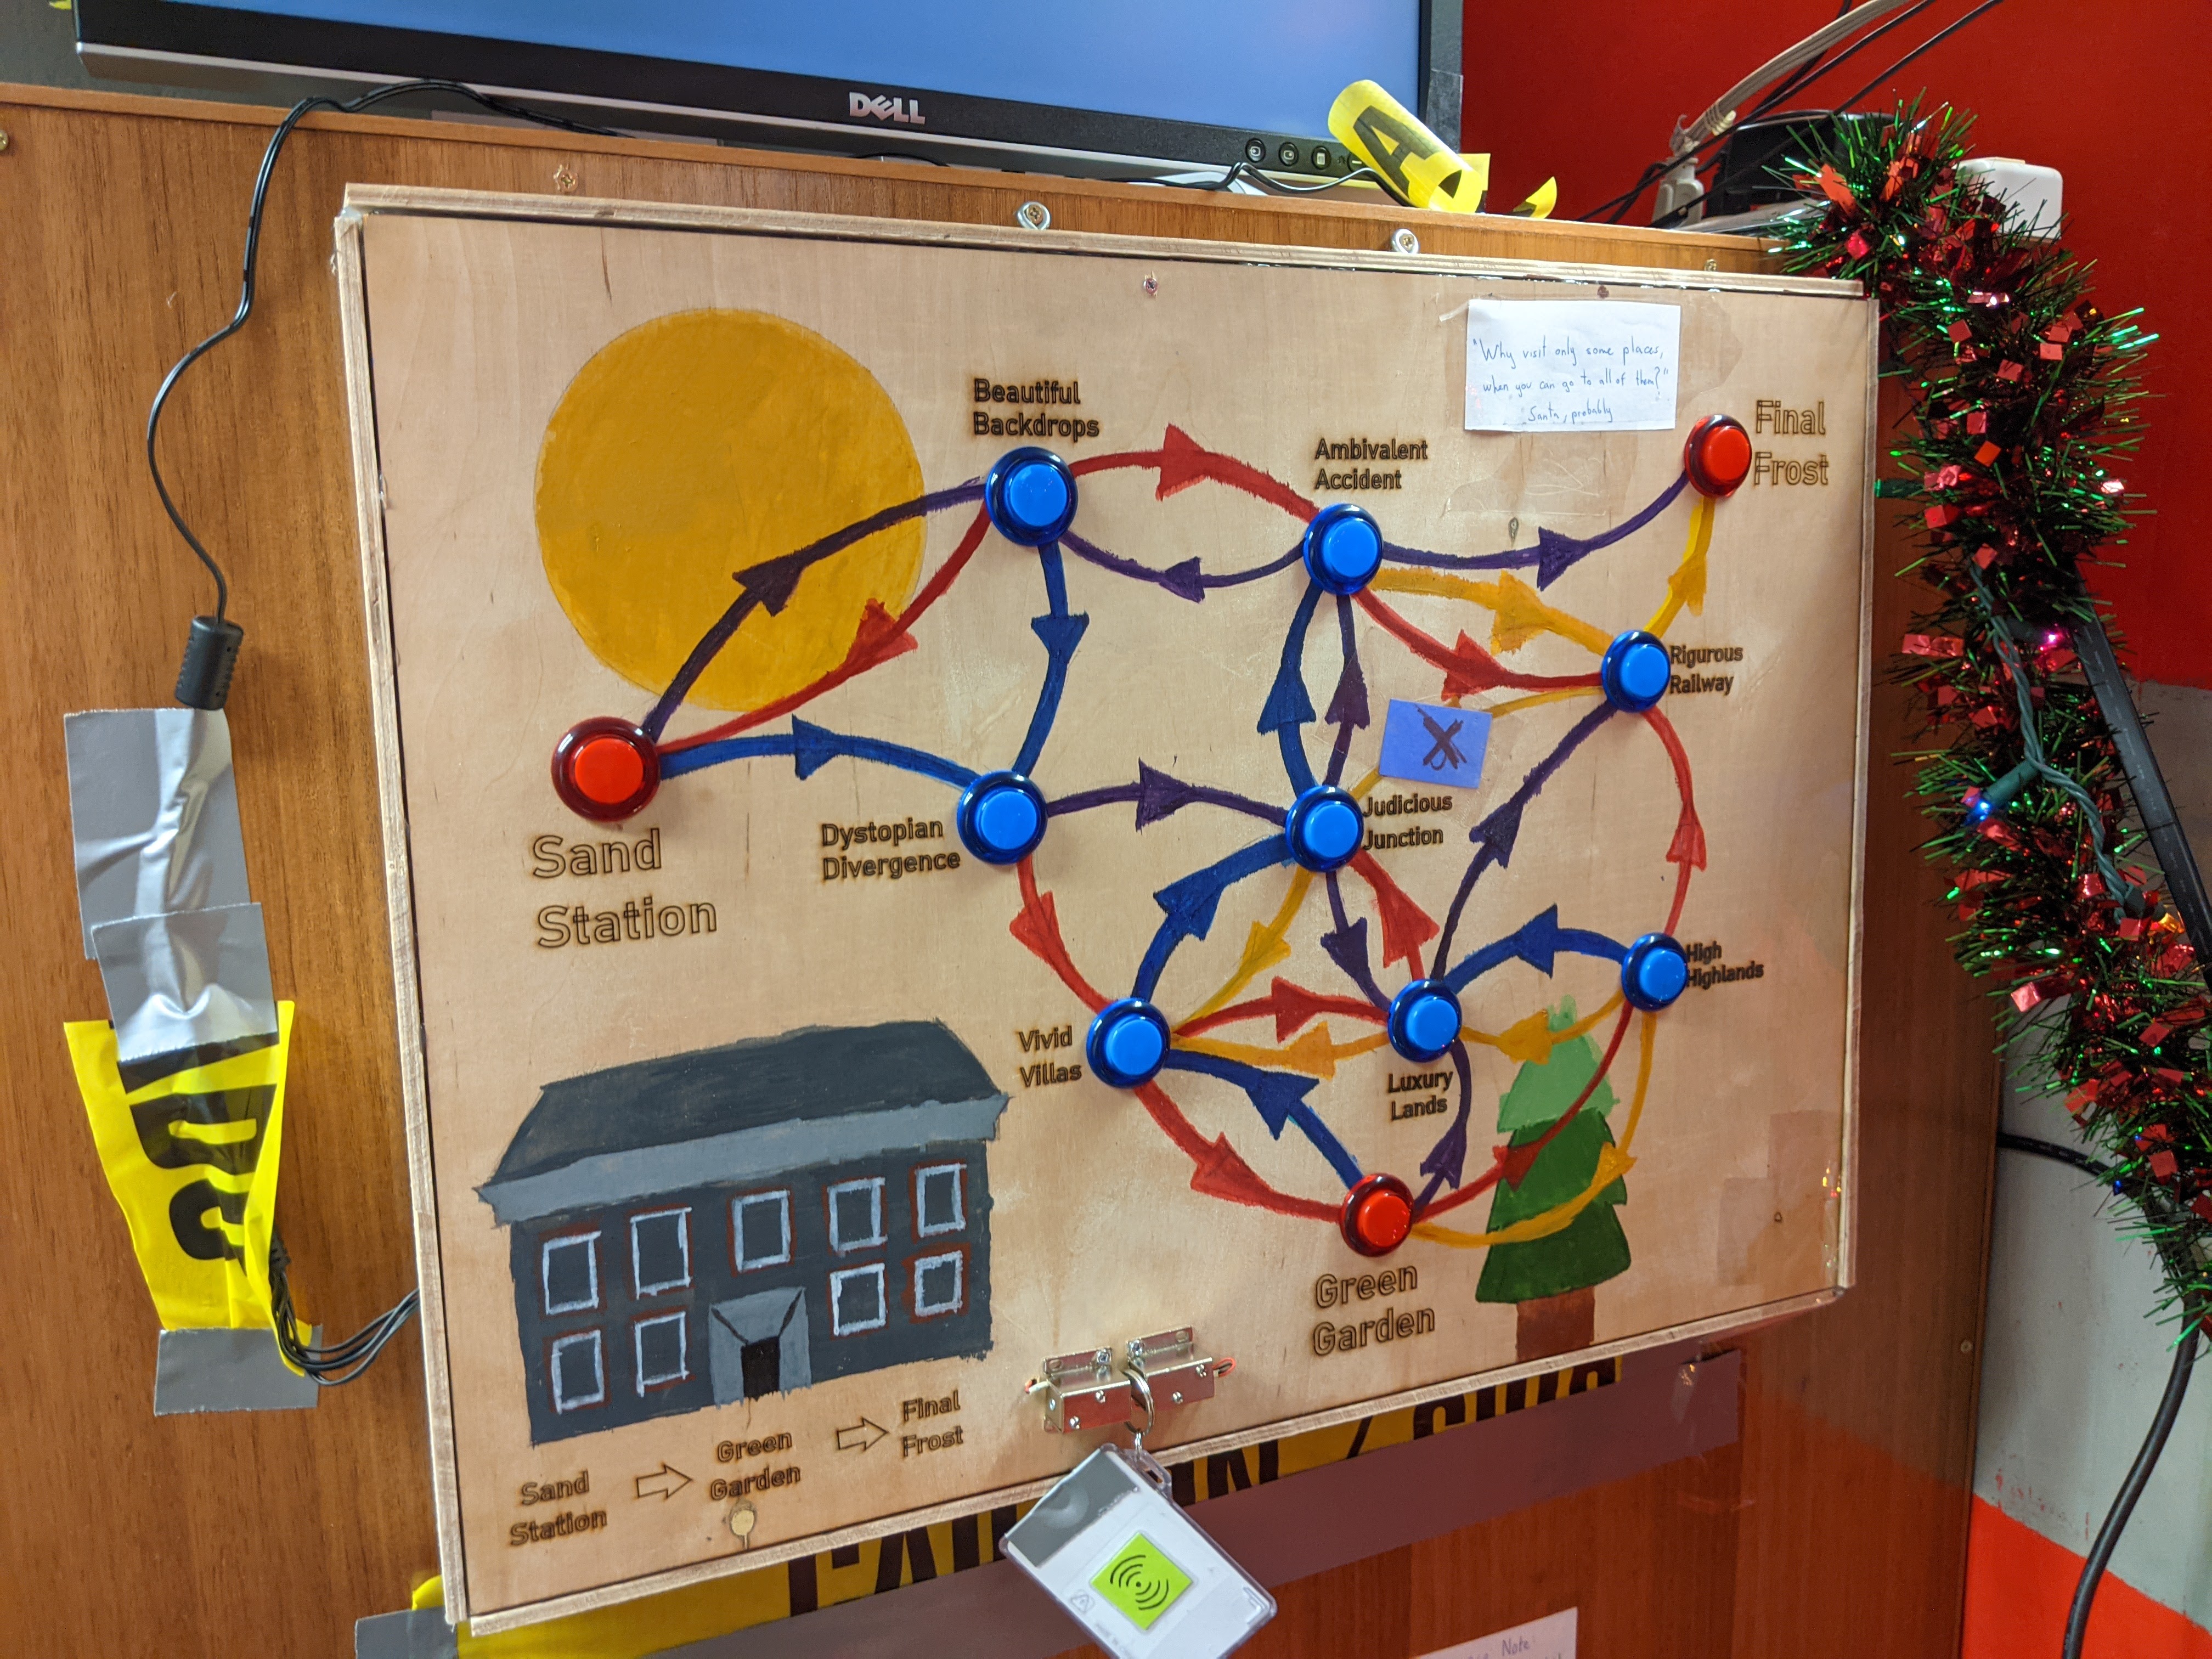 A wooden map puzzle with light-up electronic buttons